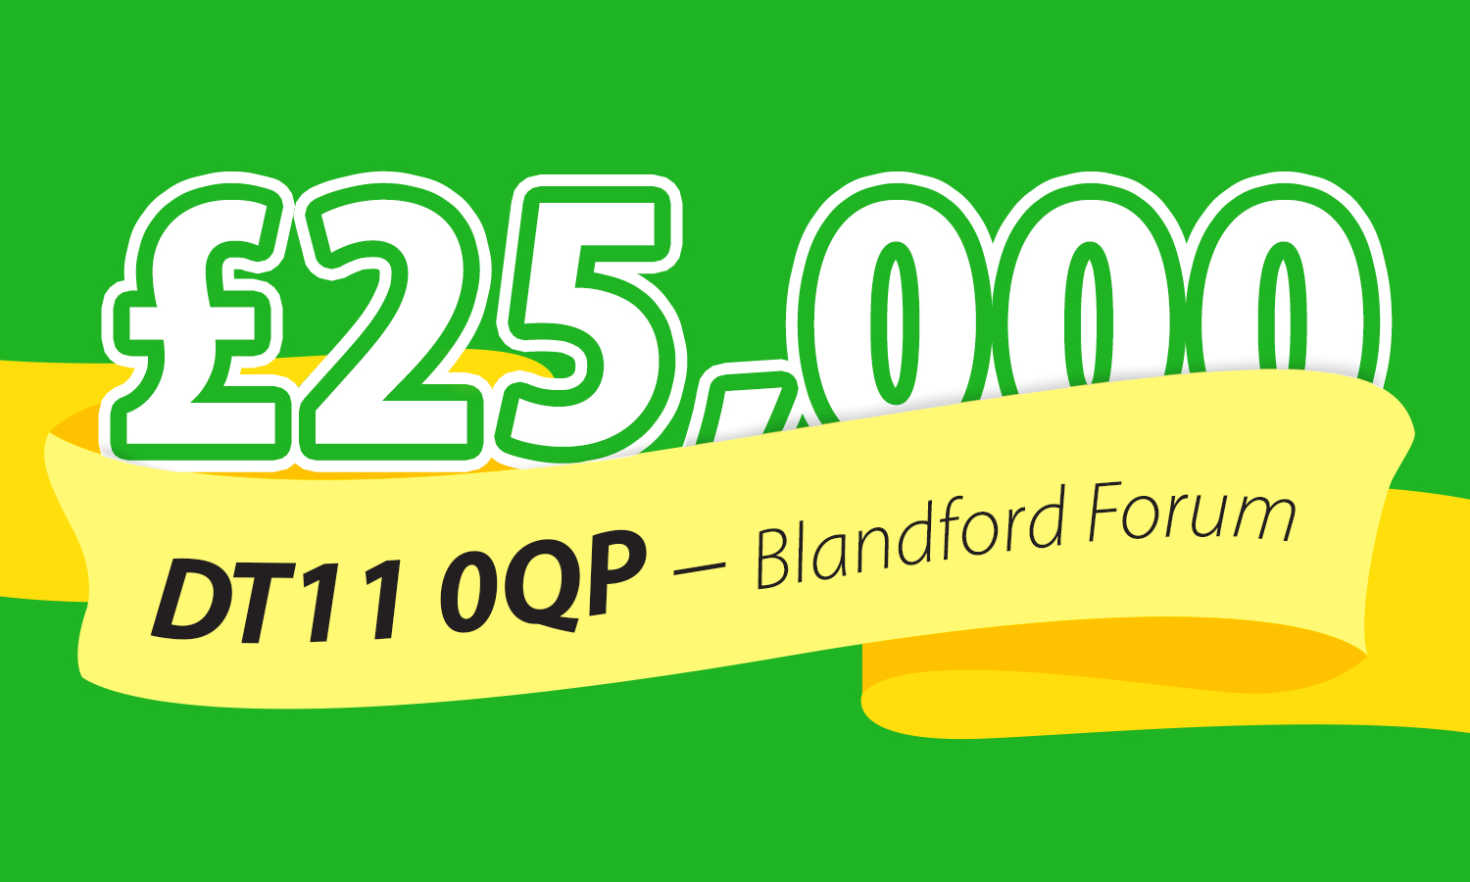 One lucky winner in Blandford Forum has won a fabulous £25,000 today